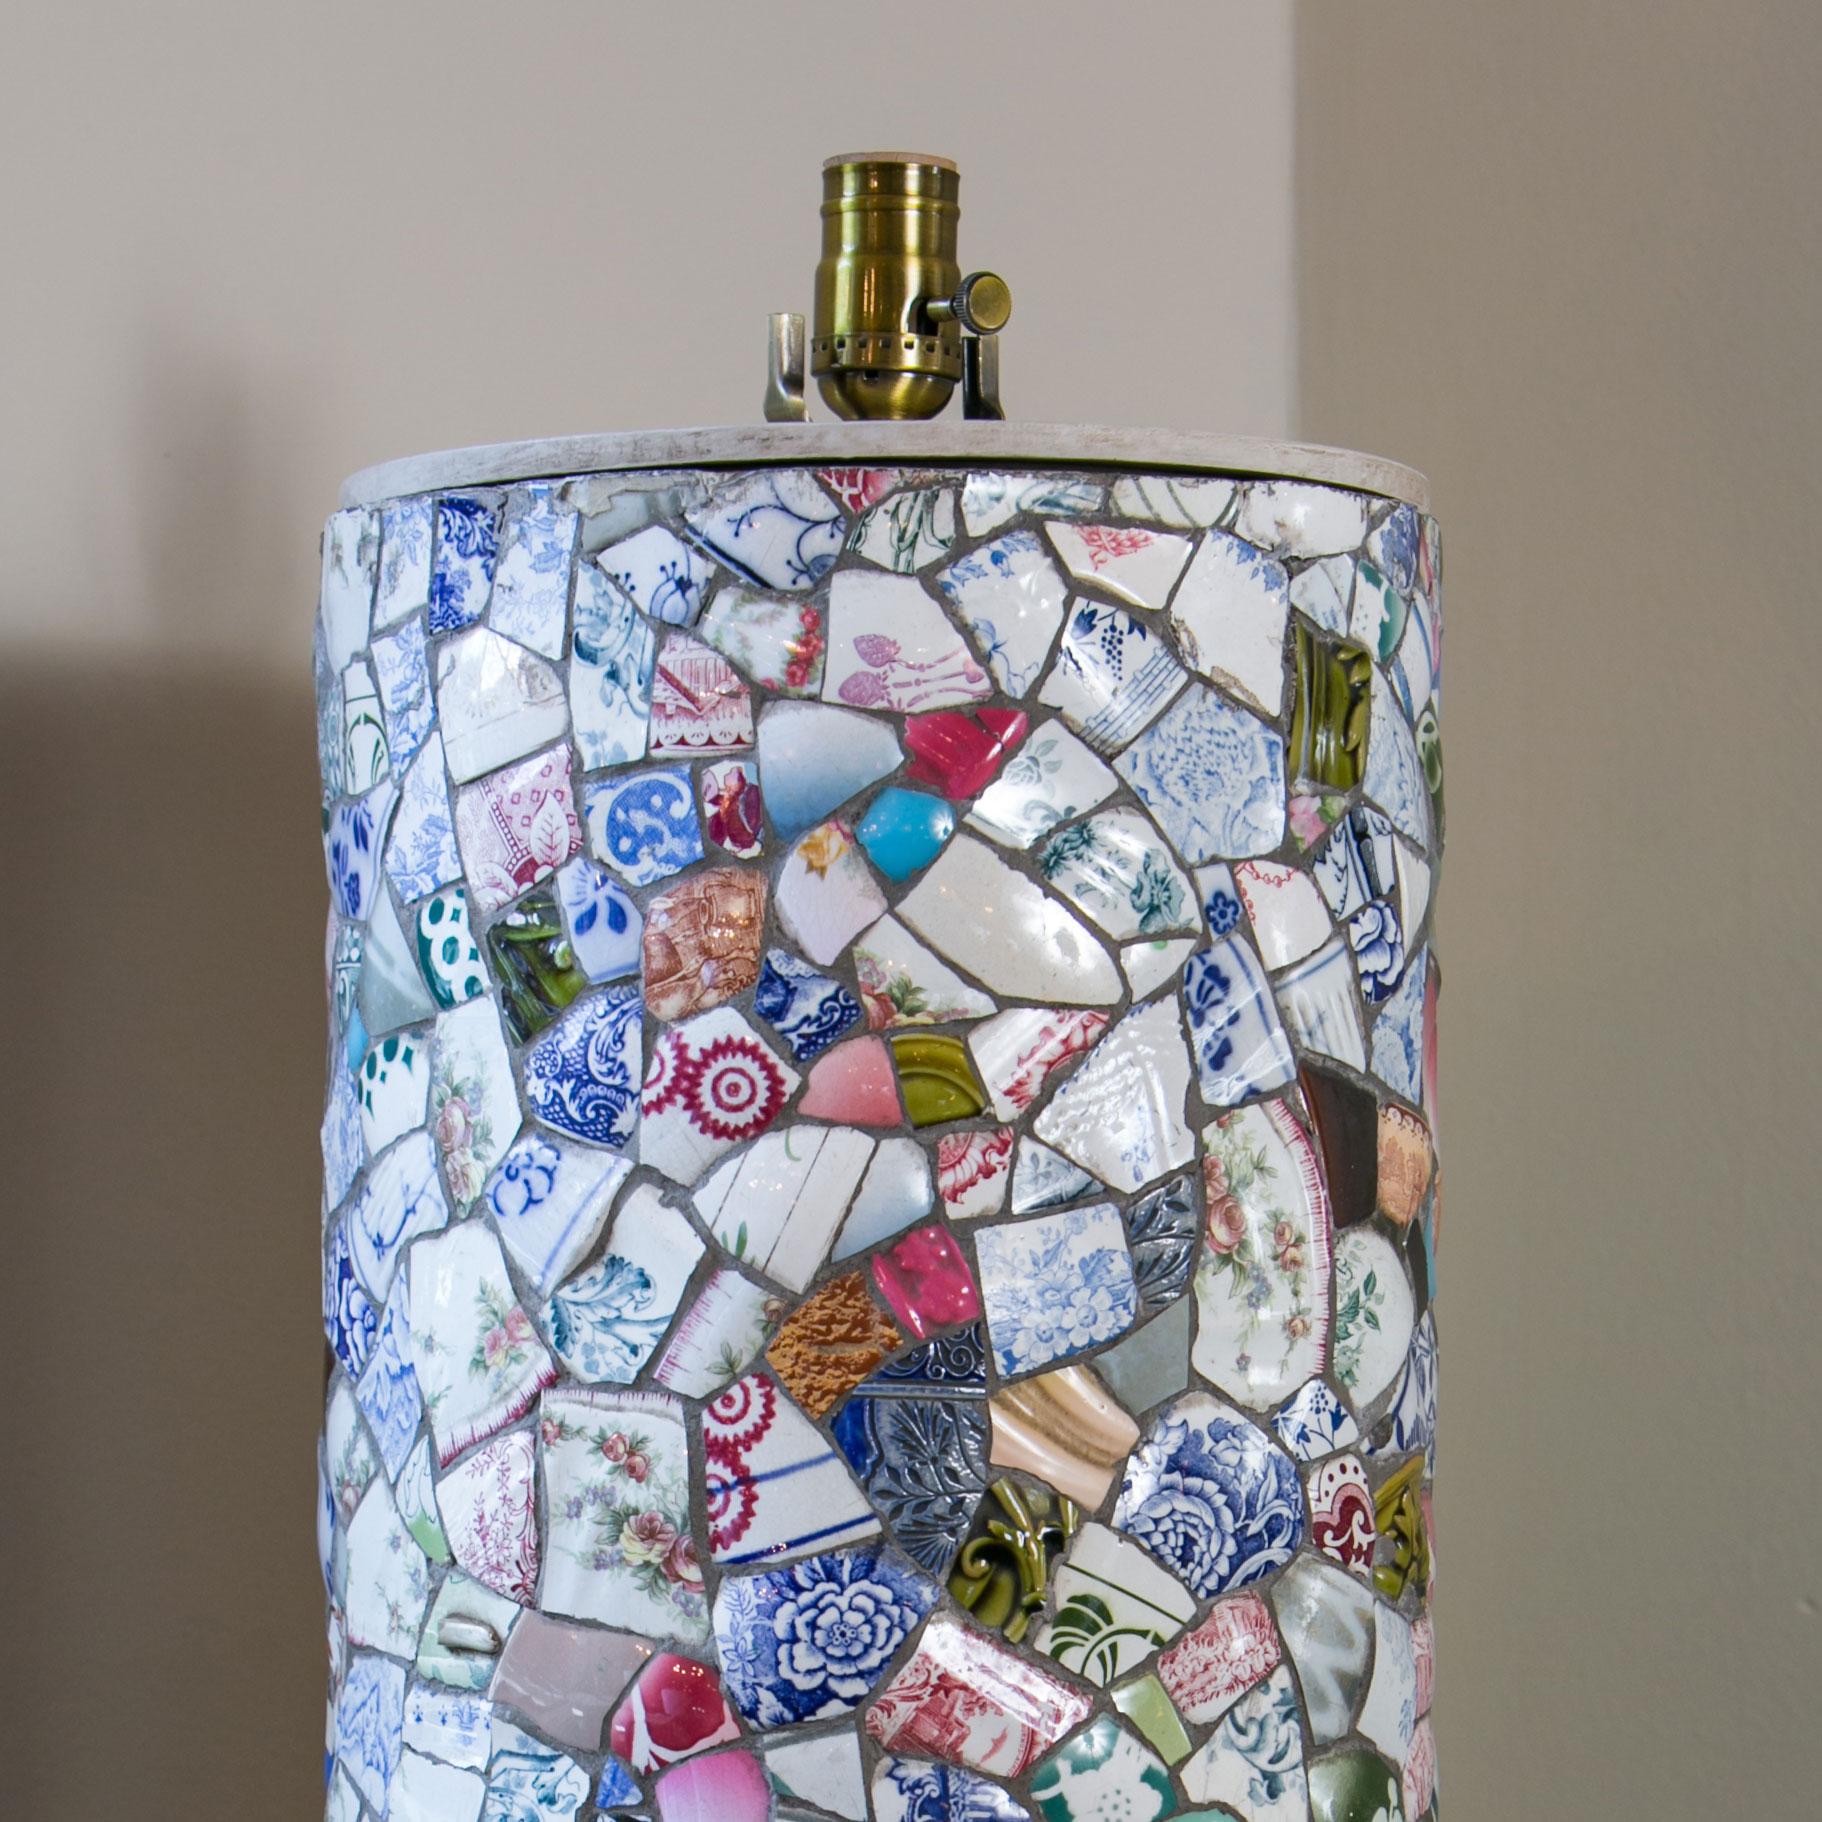 Tall charming mosaic lamp hand-made in France from pieces of vintage and antique china (circa 1940). This table lamp is hand-crafted in a type of mosaic work known as trencadis in Spain and as pique assiette, or 'thief of plates,' in France. This